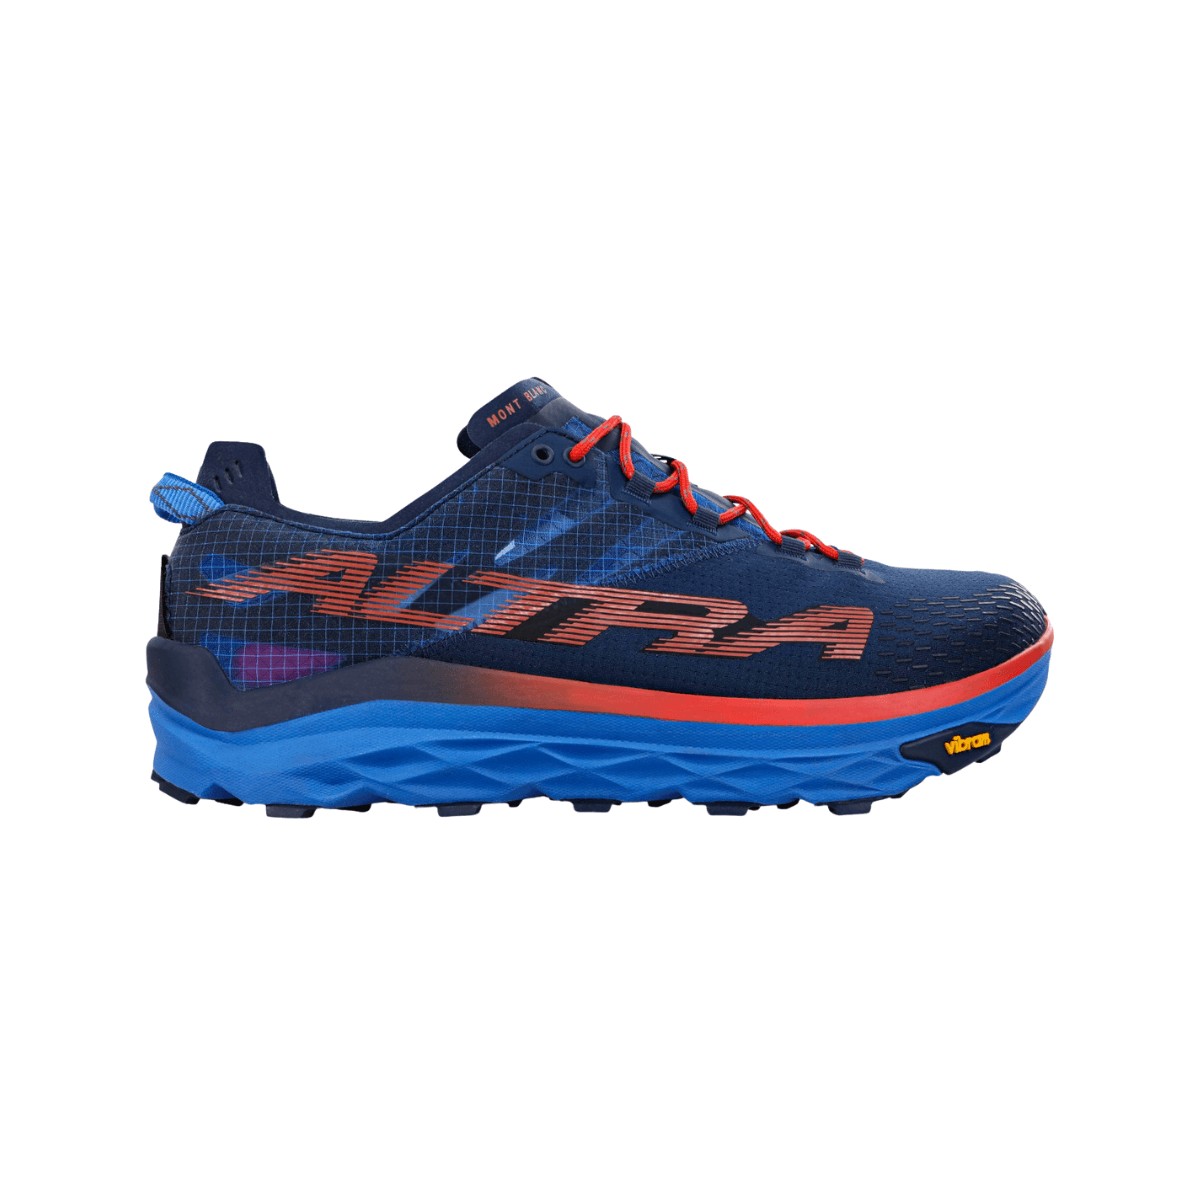 Chaussures Altra Mont Blanc Bleu Rouge SS22, Taille 42 - EUR